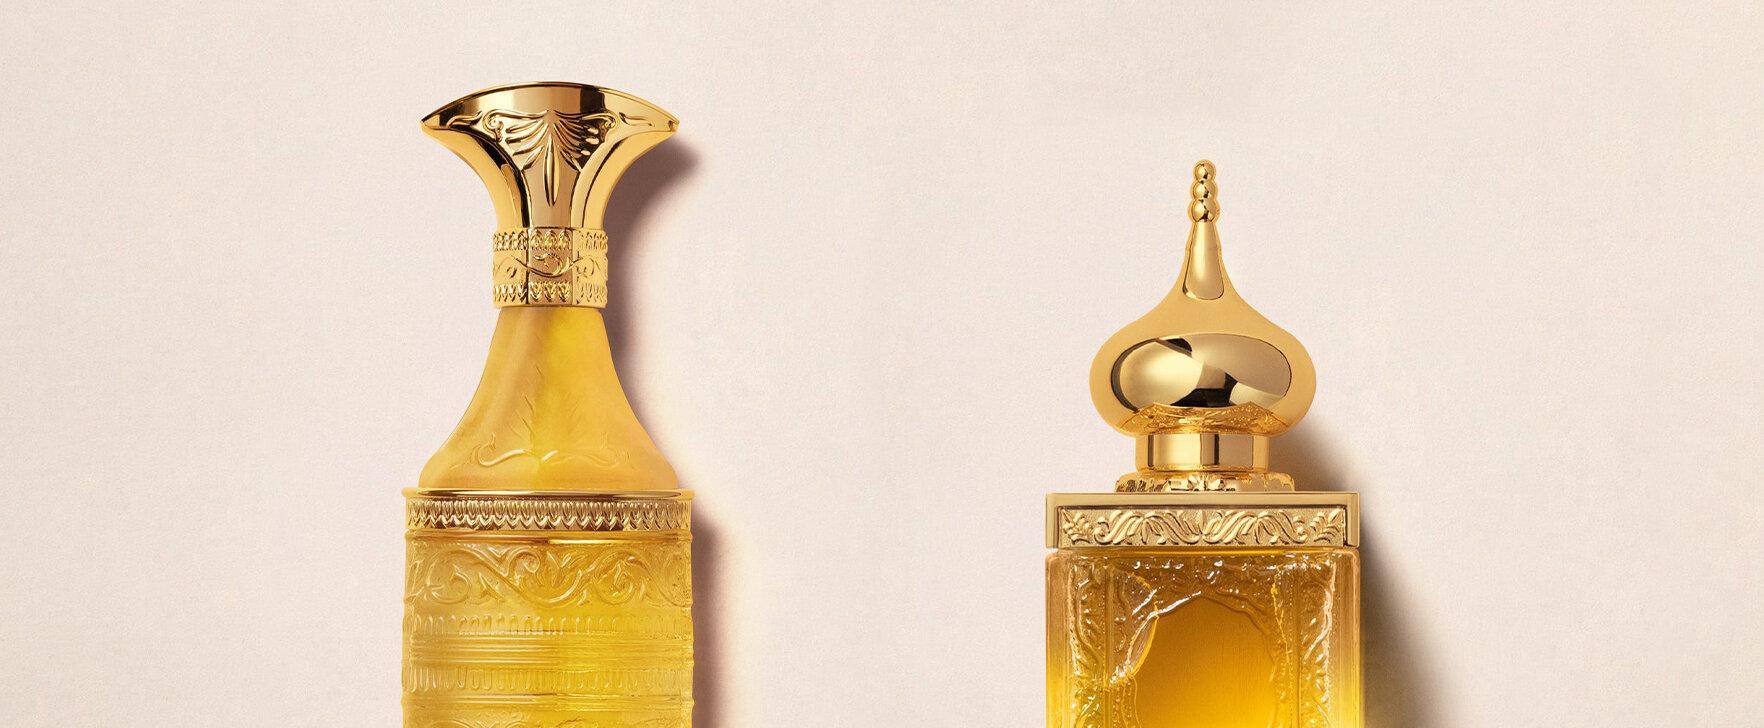 40 Years of High Perfumery: The Limited-edition Fragrance Duo "Cristal & Gold" by Amouage